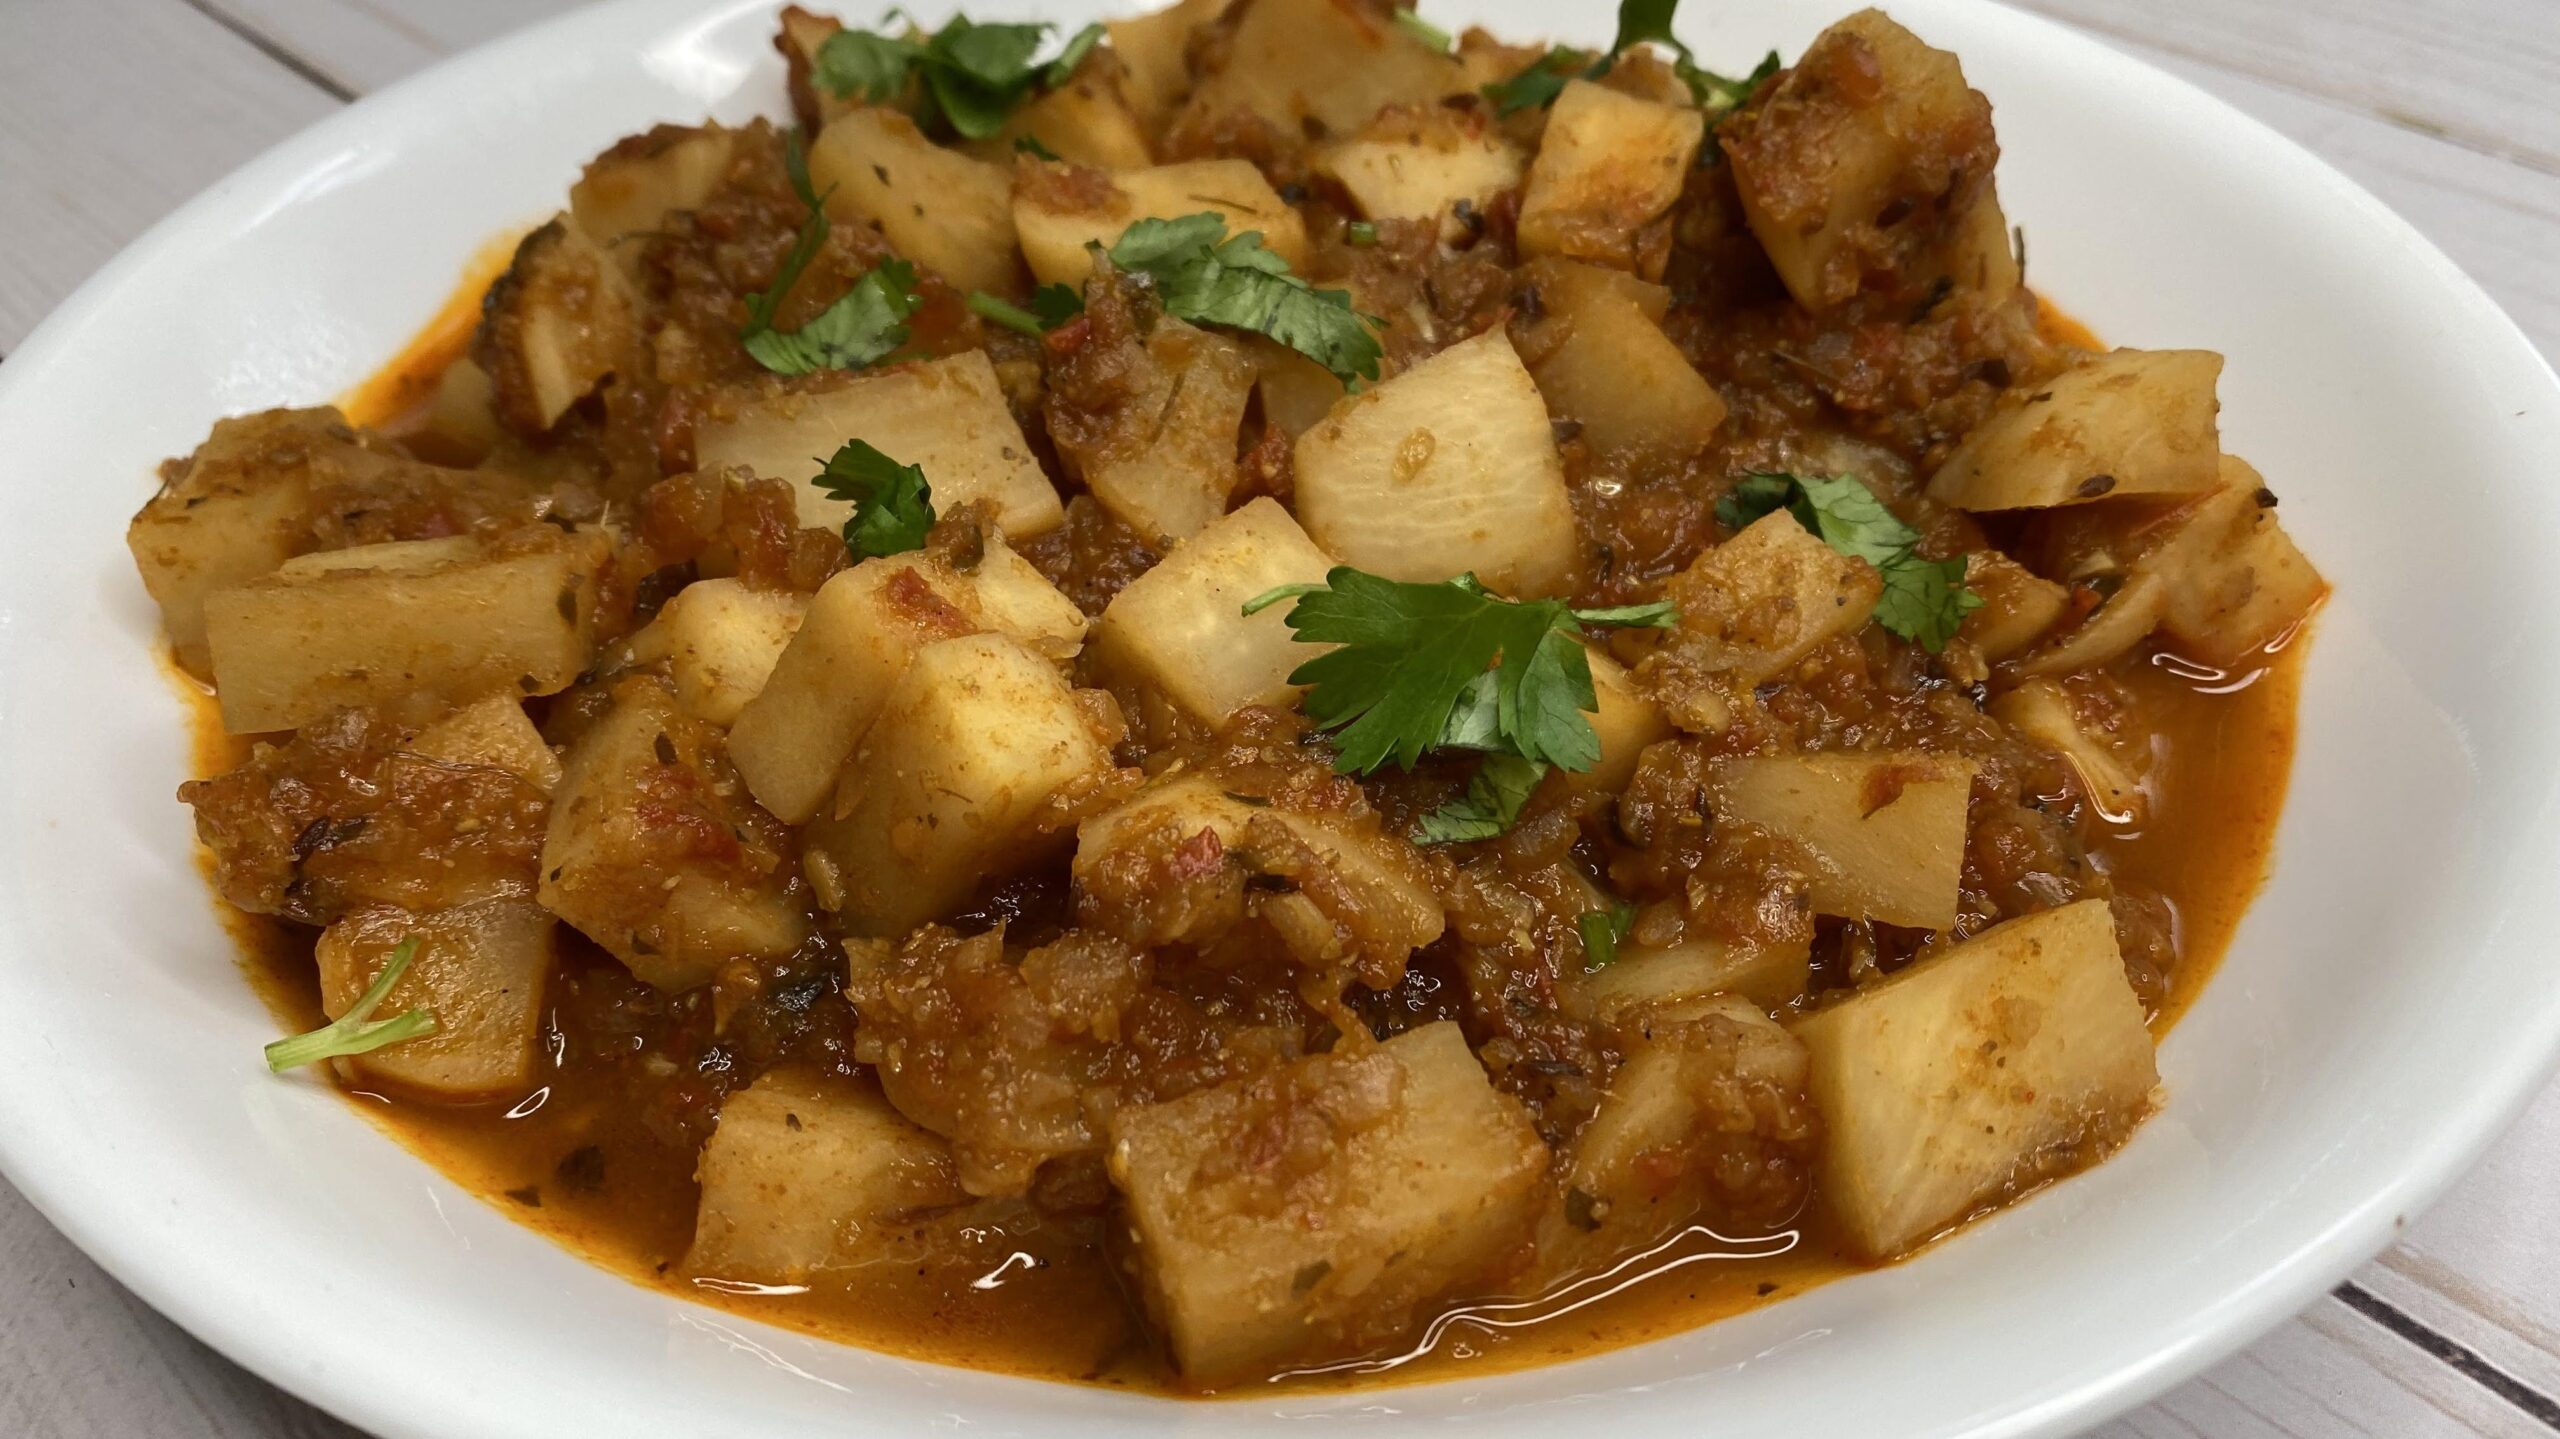  Turnips never tasted so good! This vegan turnip curry is a surefire crowd-pleaser.